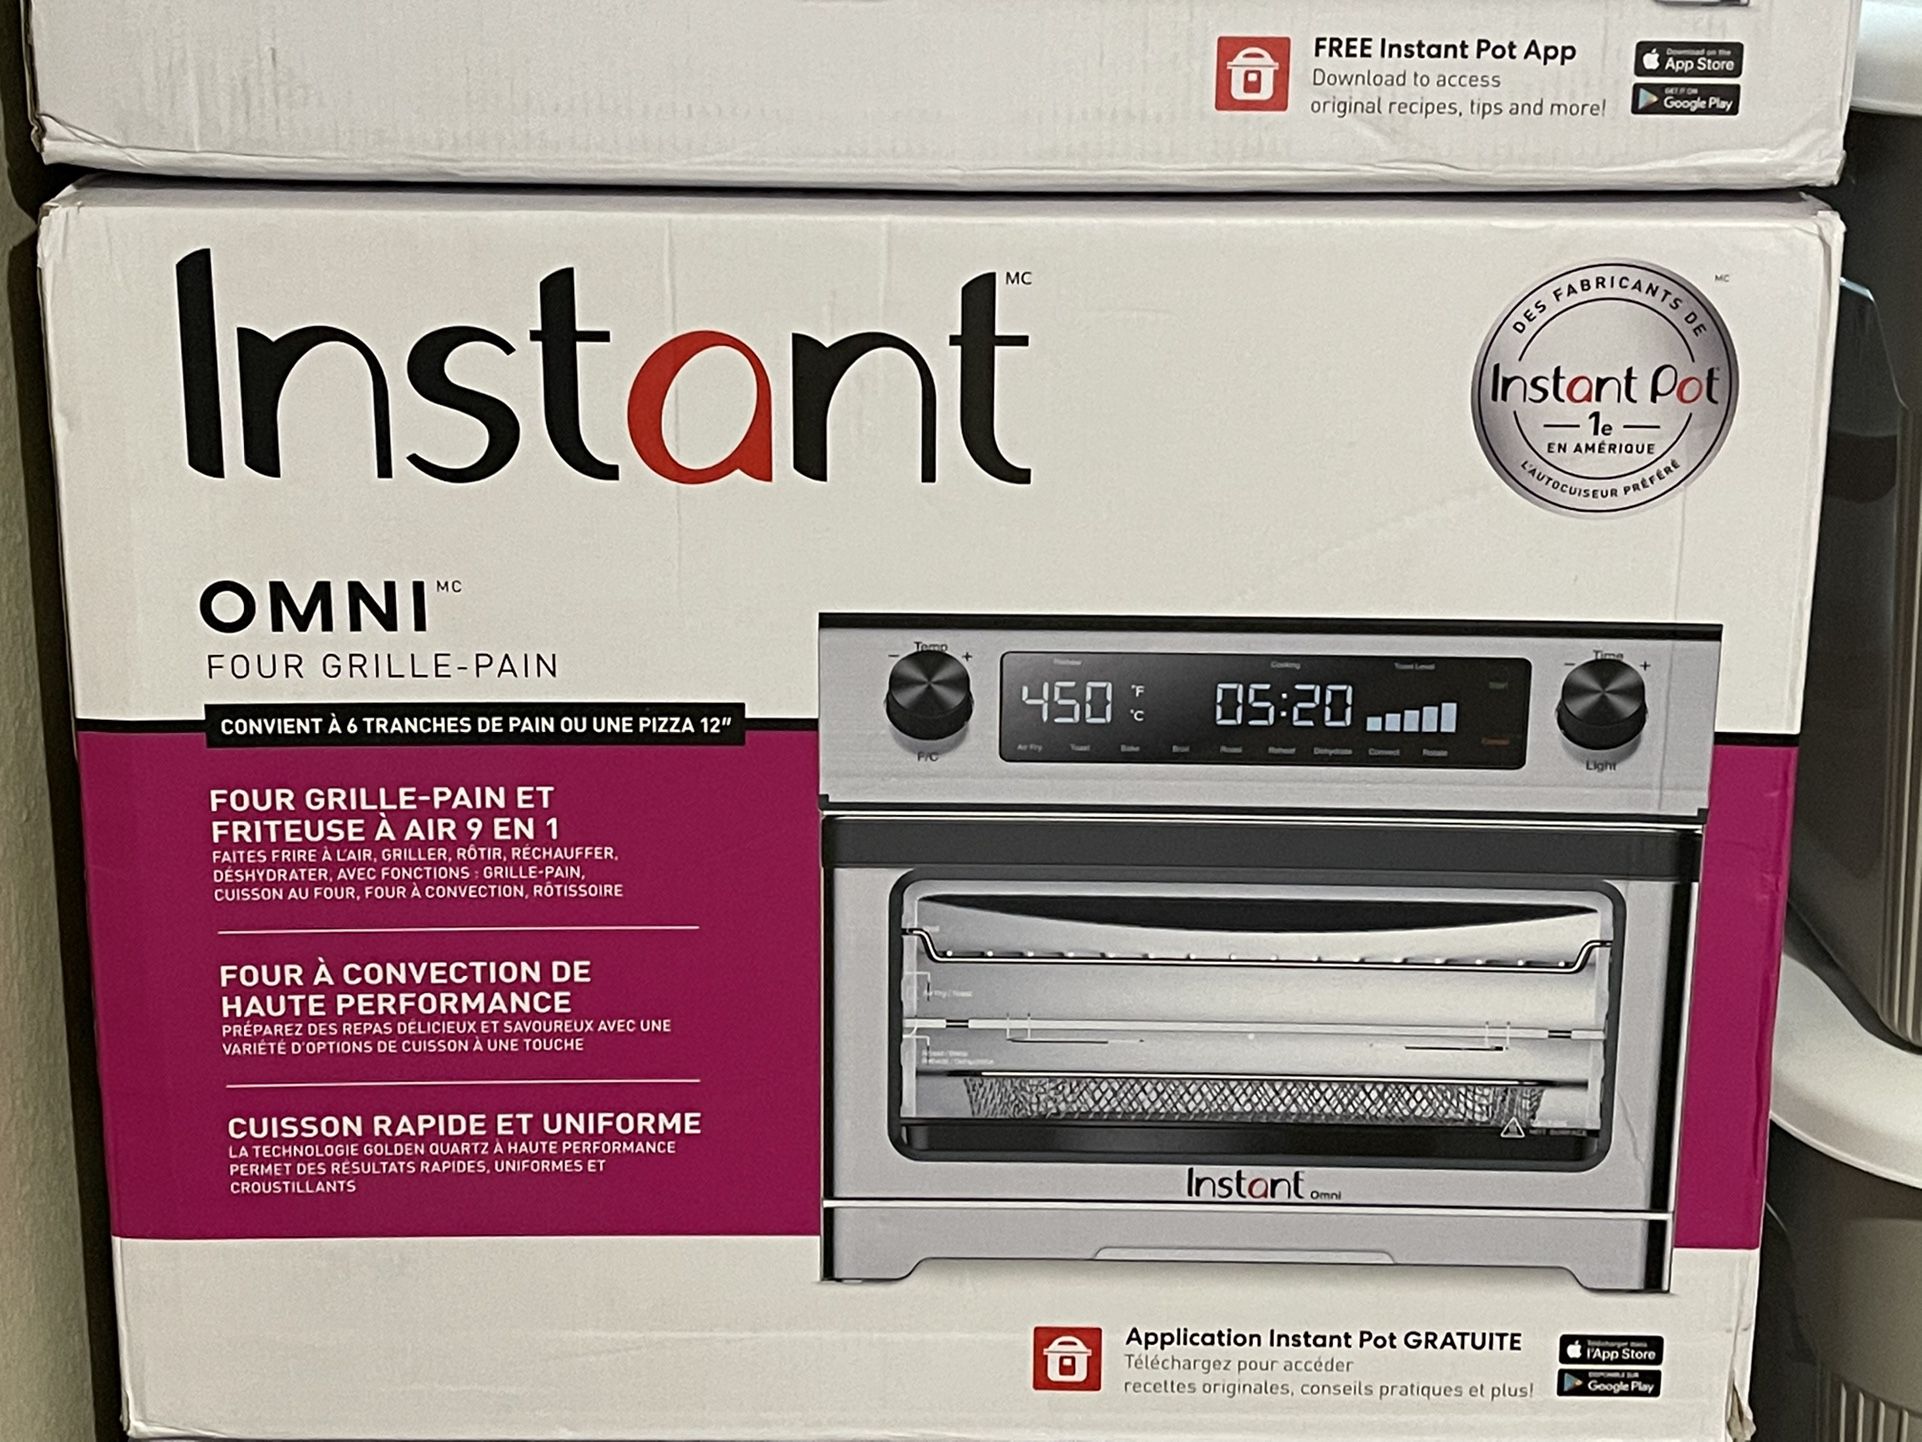 Instant Pot, Omni 9-In-1 Toaster Oven with Air Fry, Dehydrate, Toast, Roast, Bake, Broil, and Reheat